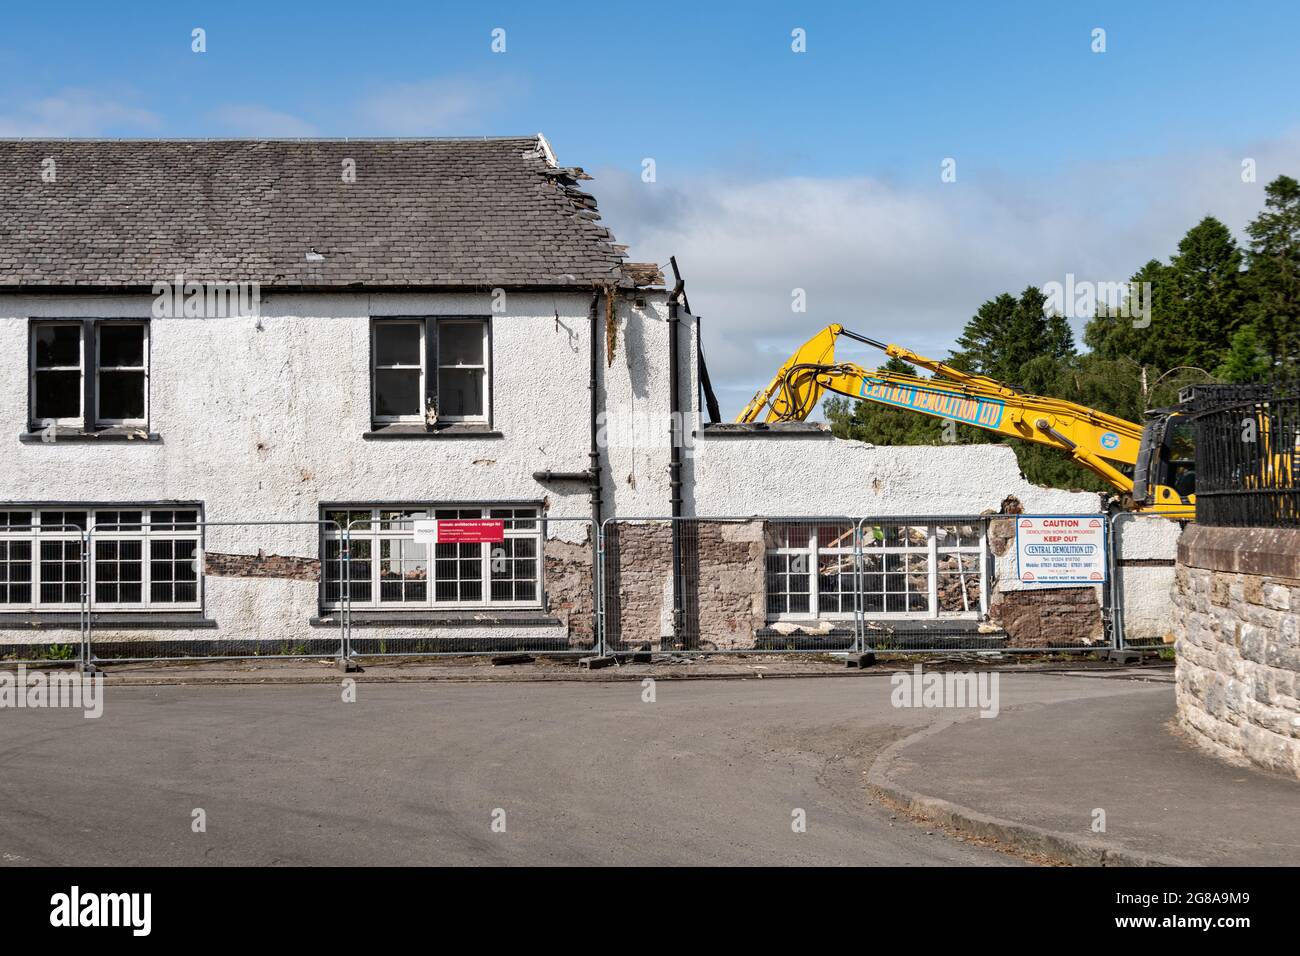 Black Bull hotel and public house demolition in the Stirlingshire village of Killearn to make way for residential apartments, Scotland, UK Stock Photo